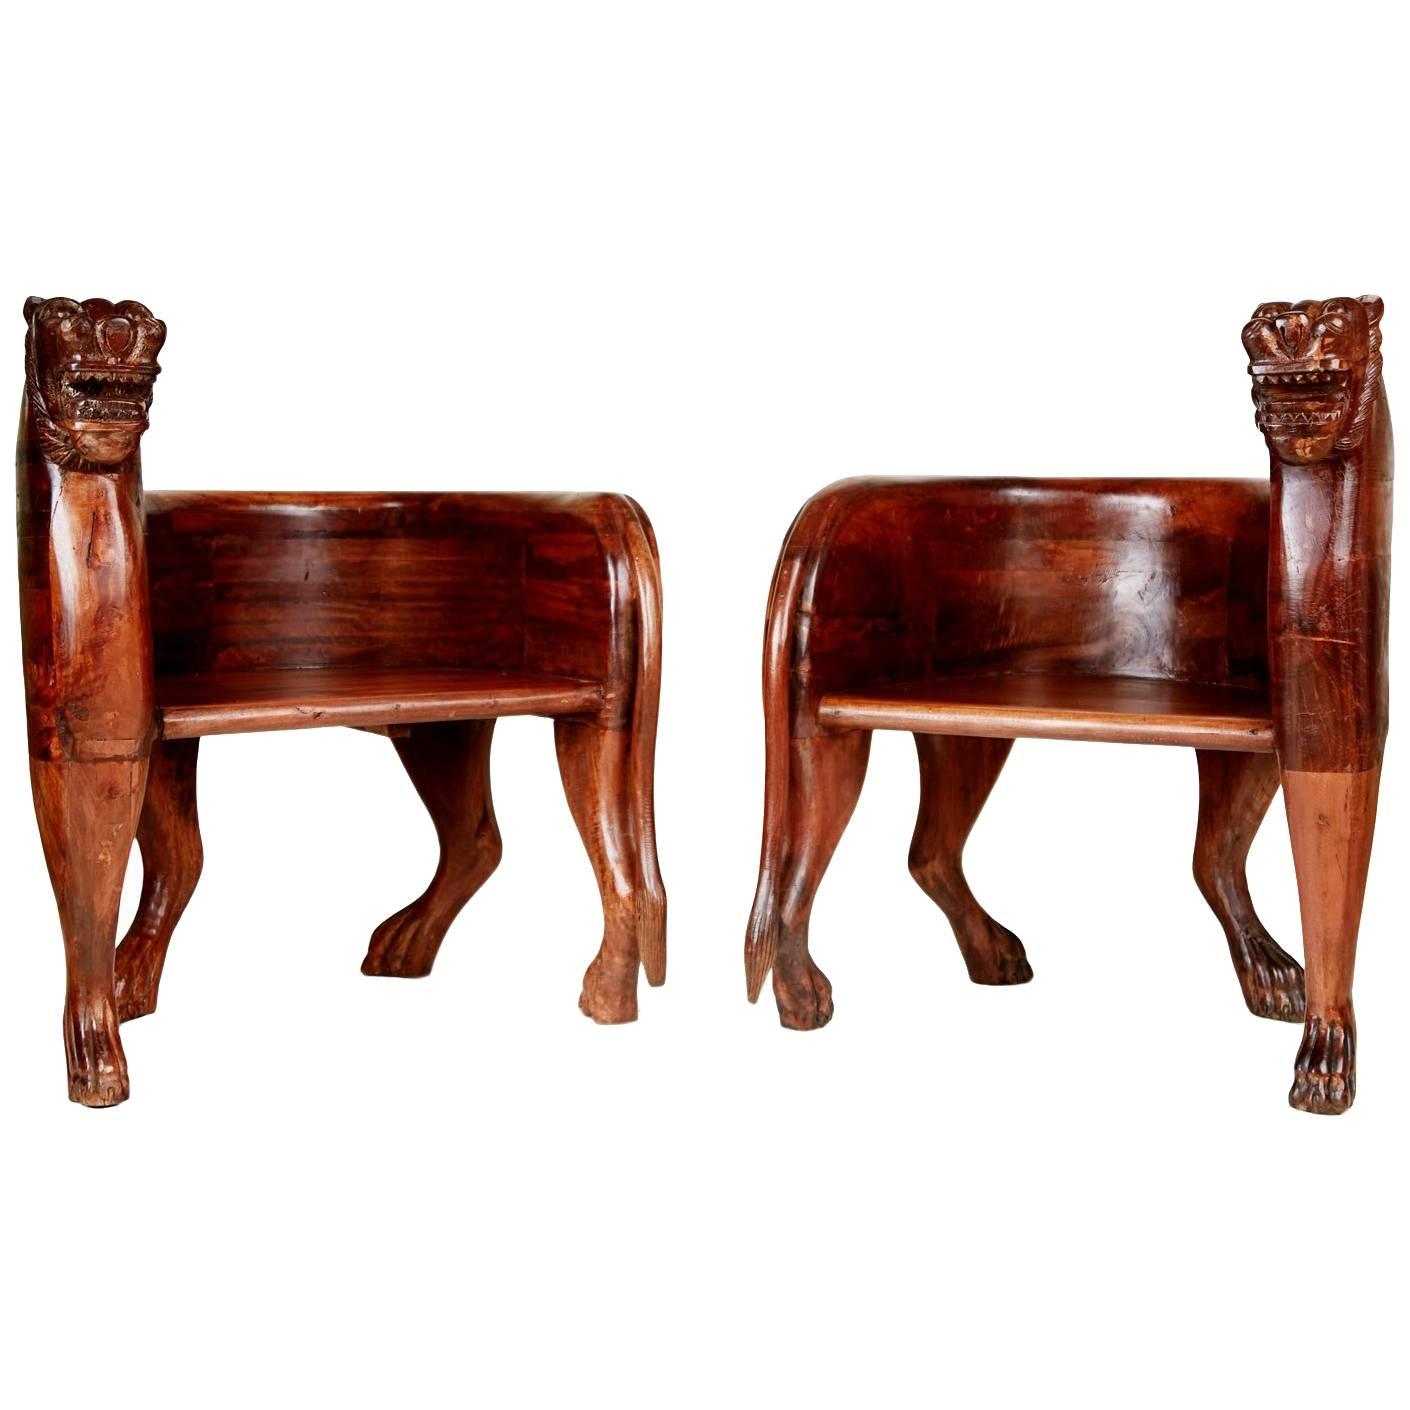 Figural Full Body Carved Teak Wood Lioness Club Chairs, Pair